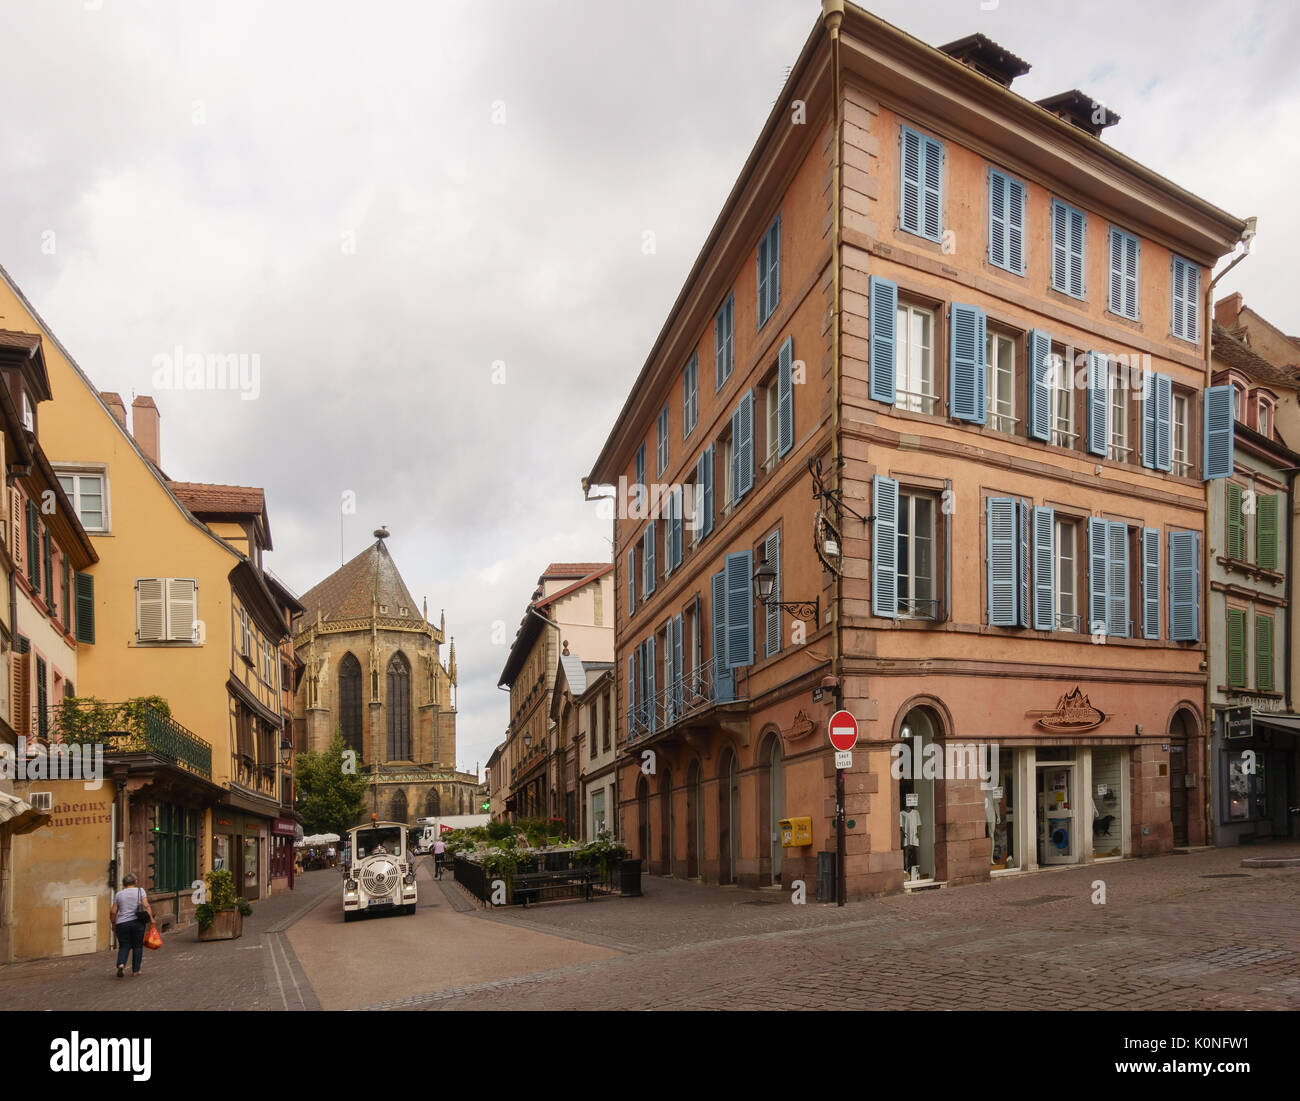 Old wide street with tourist train and people walking, paving stones and old building in perspective. Colmar, France. Stock Photo